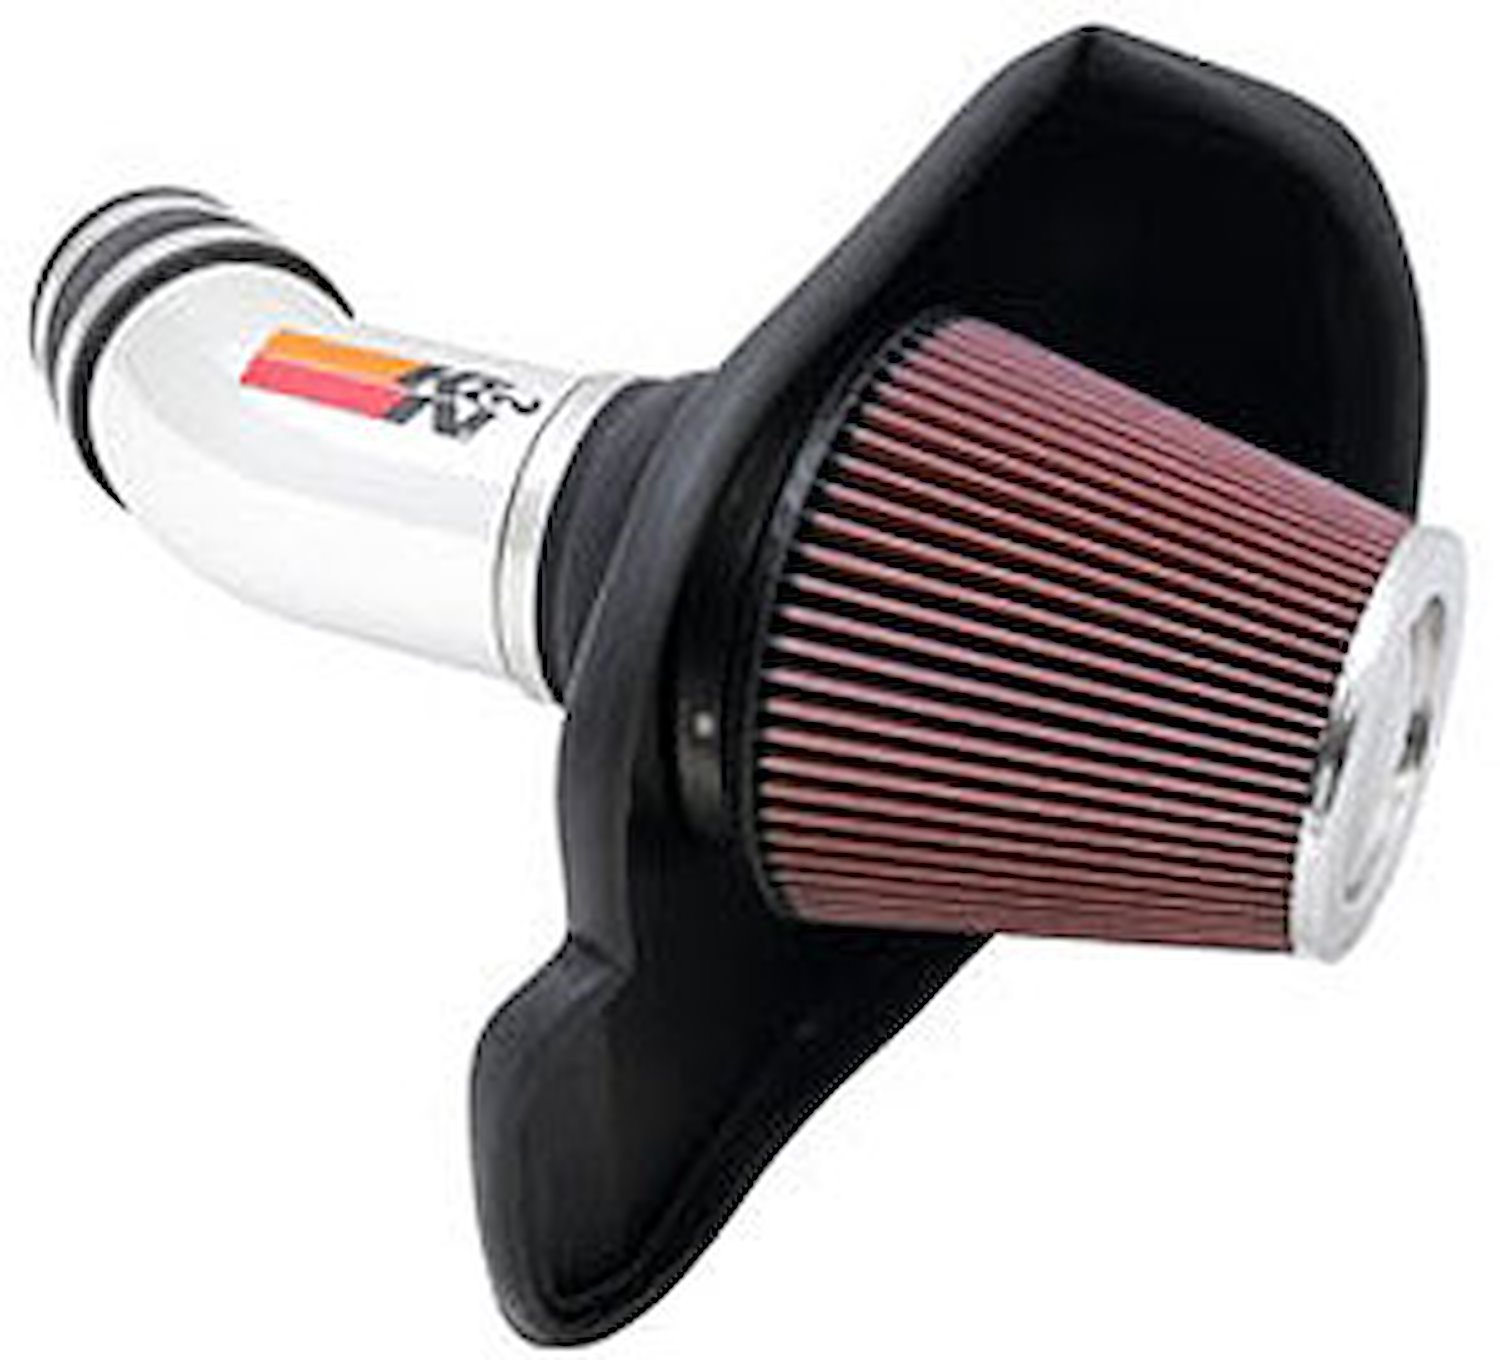 K&N 69-7064TS COLD AIR INTAKE FOR 2013-2017 NISSAN ALTIMA 2.5L L4 FUEL INJECTION